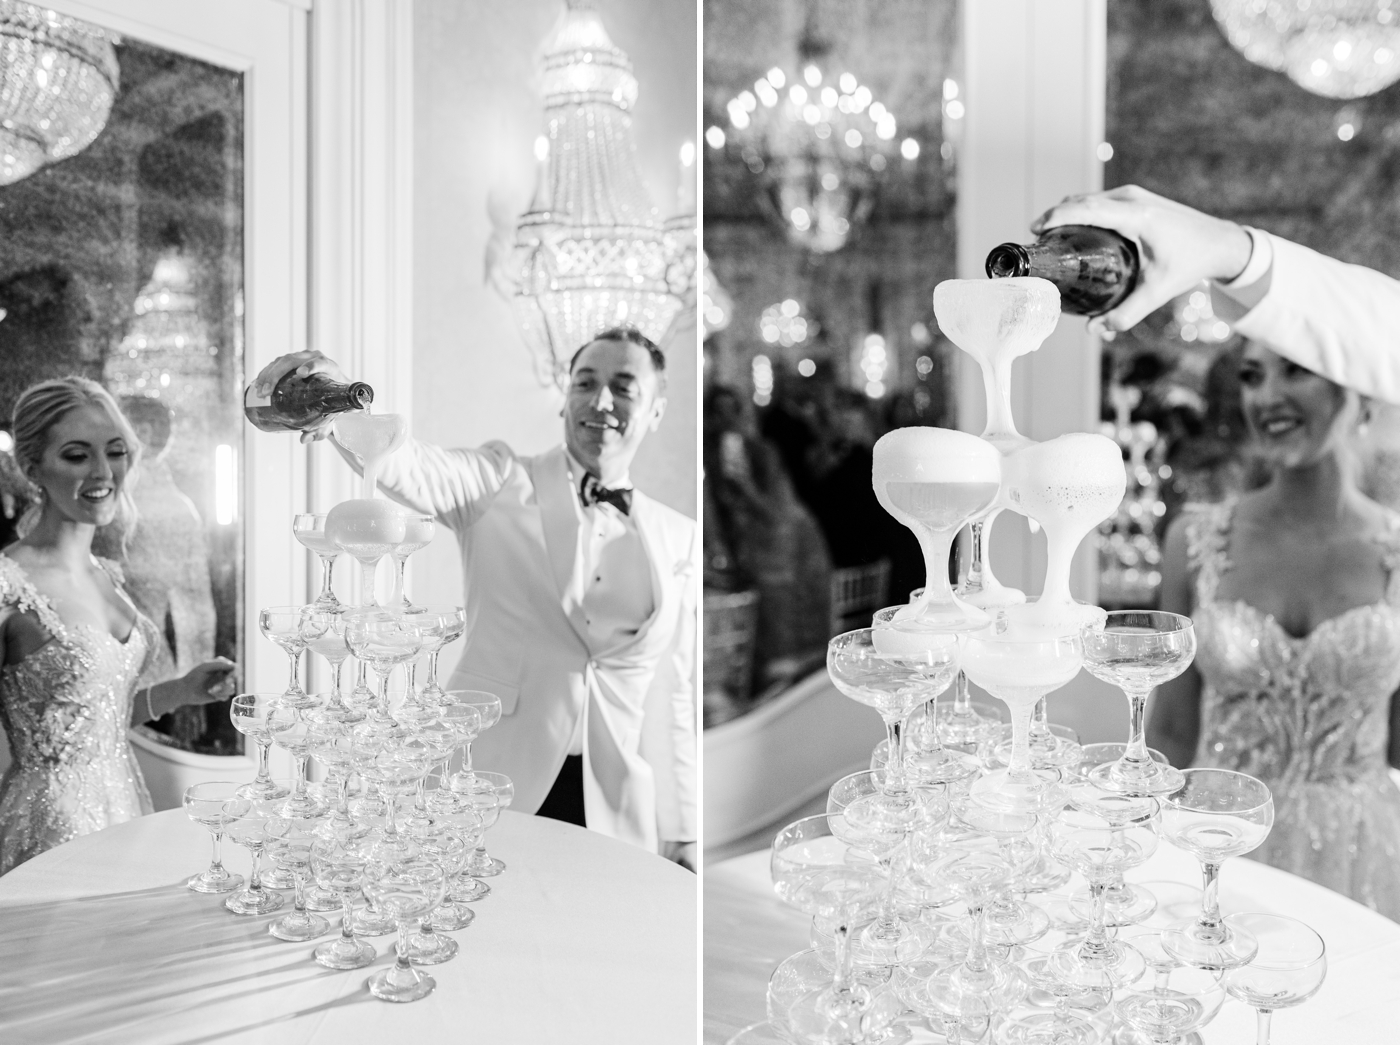 2023 Wedding Trends to Inspire Your Georgia Wedding - Champagne Tower